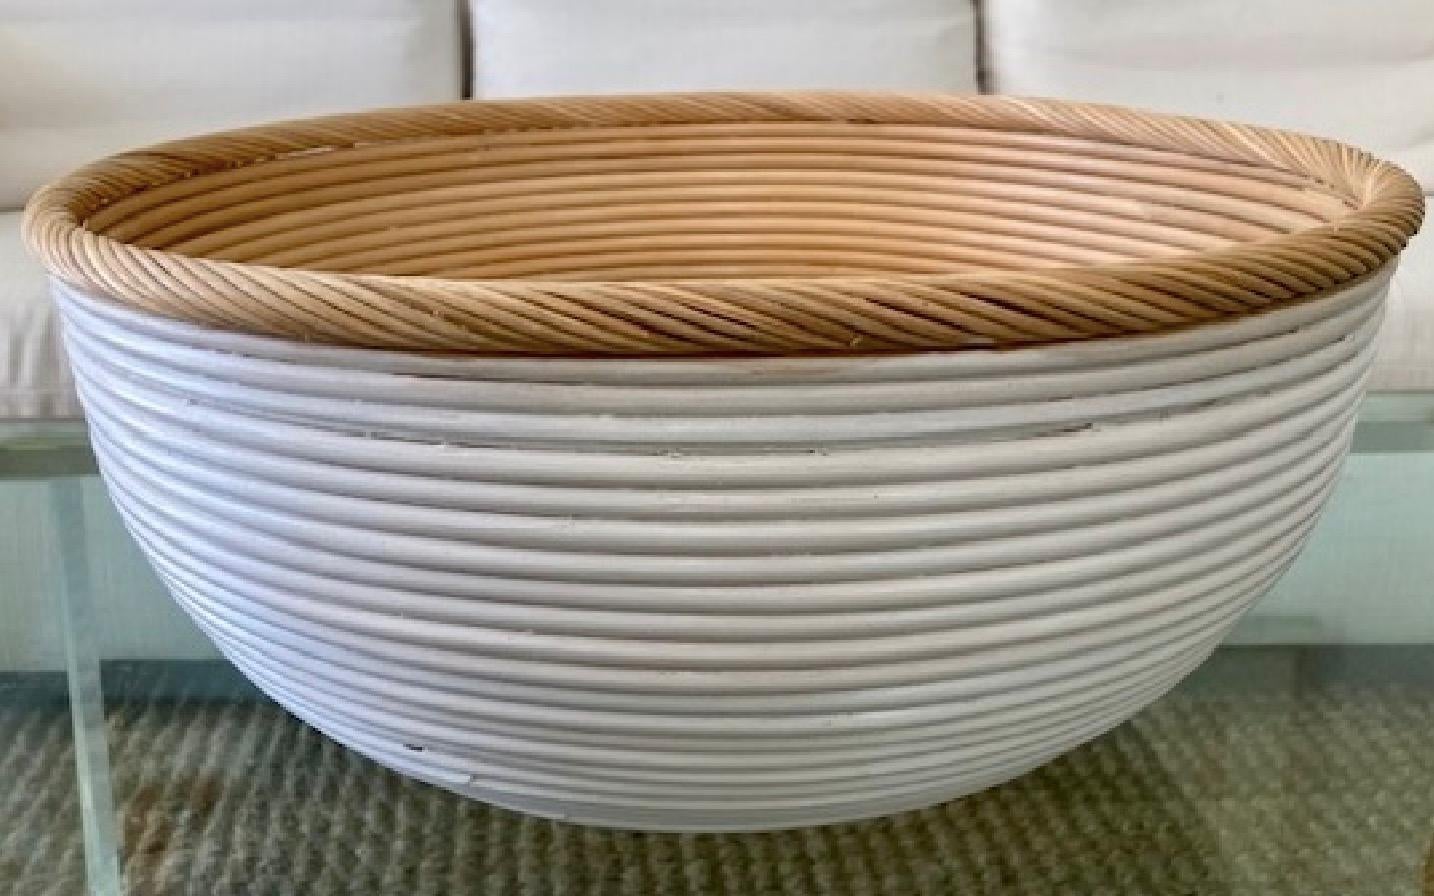 Beautiful white and natural rattan center piece. We have two of these pieces in stock, and also another similar pair in a larger size so collect all!